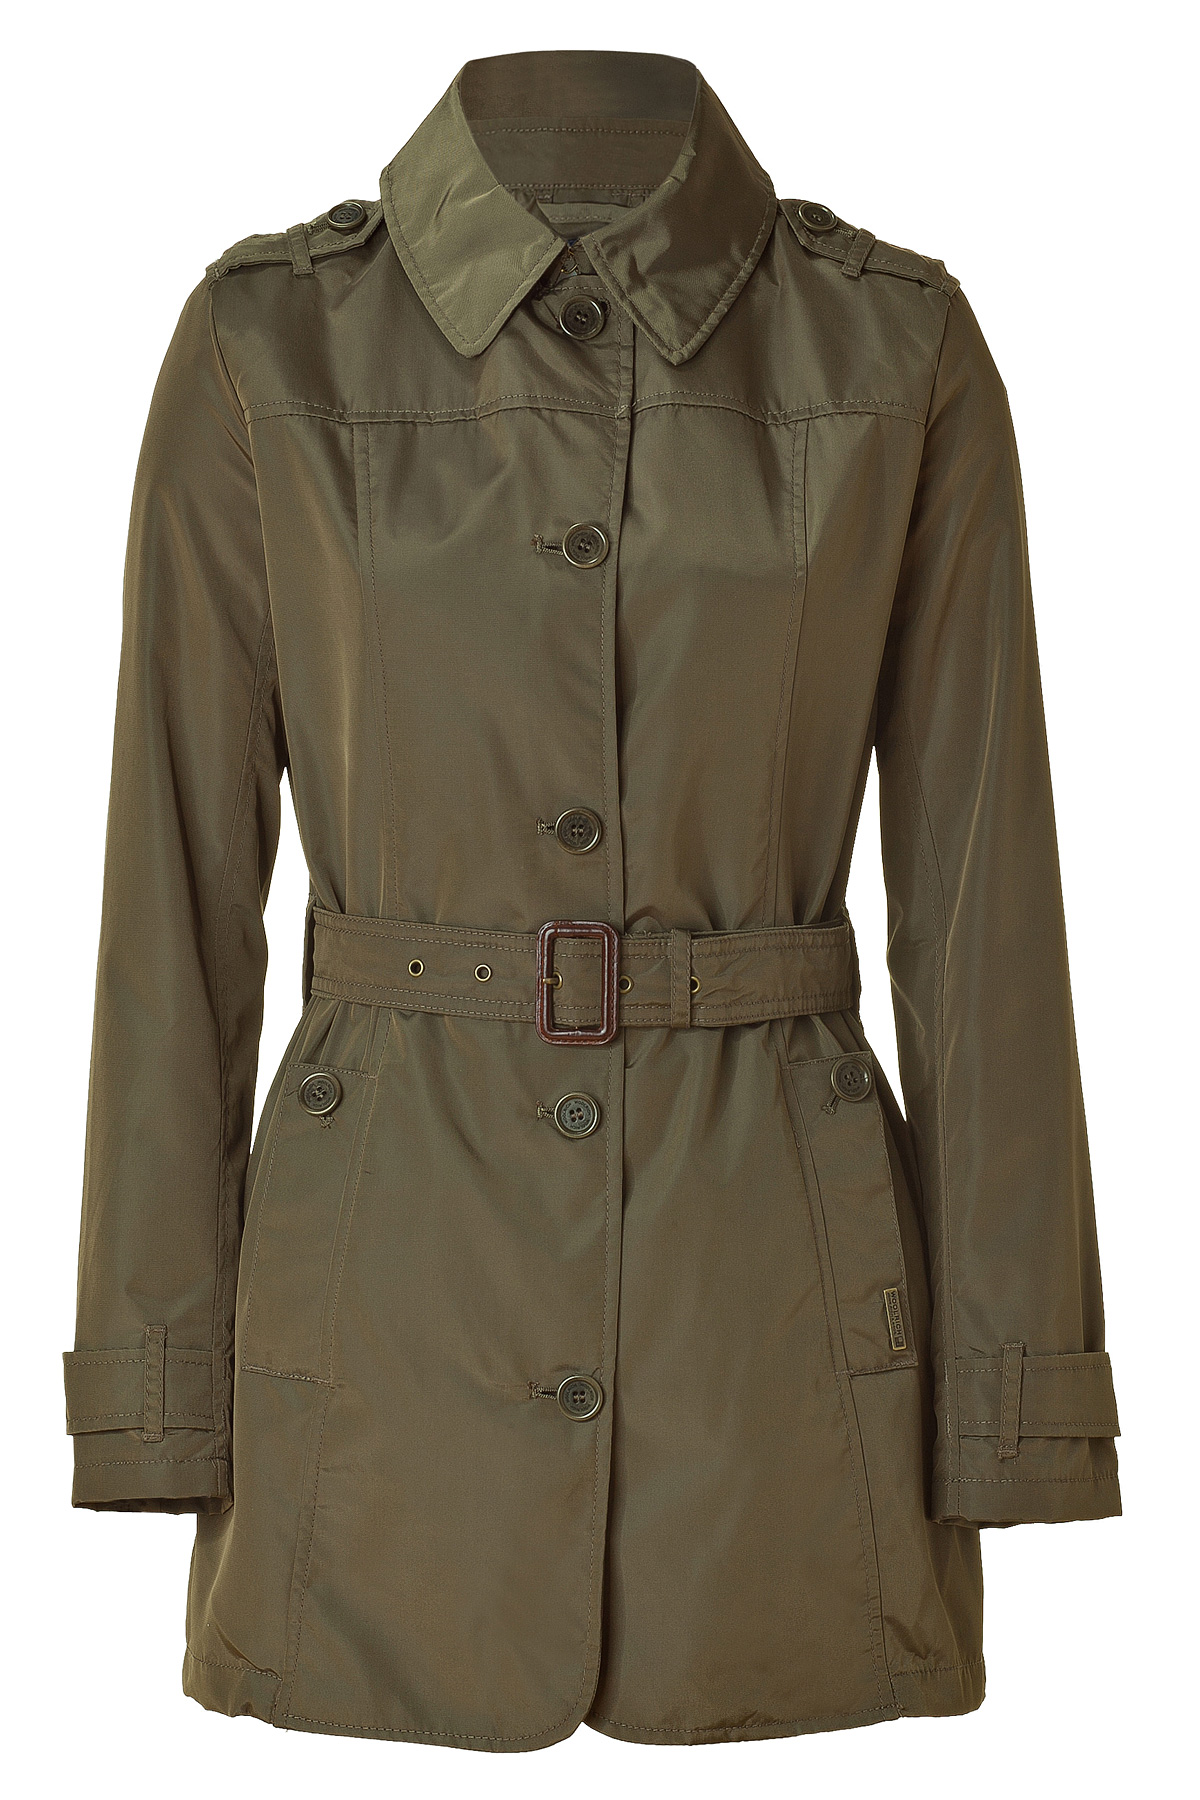 Lyst - Woolrich Olive Green Trench Coat in Green